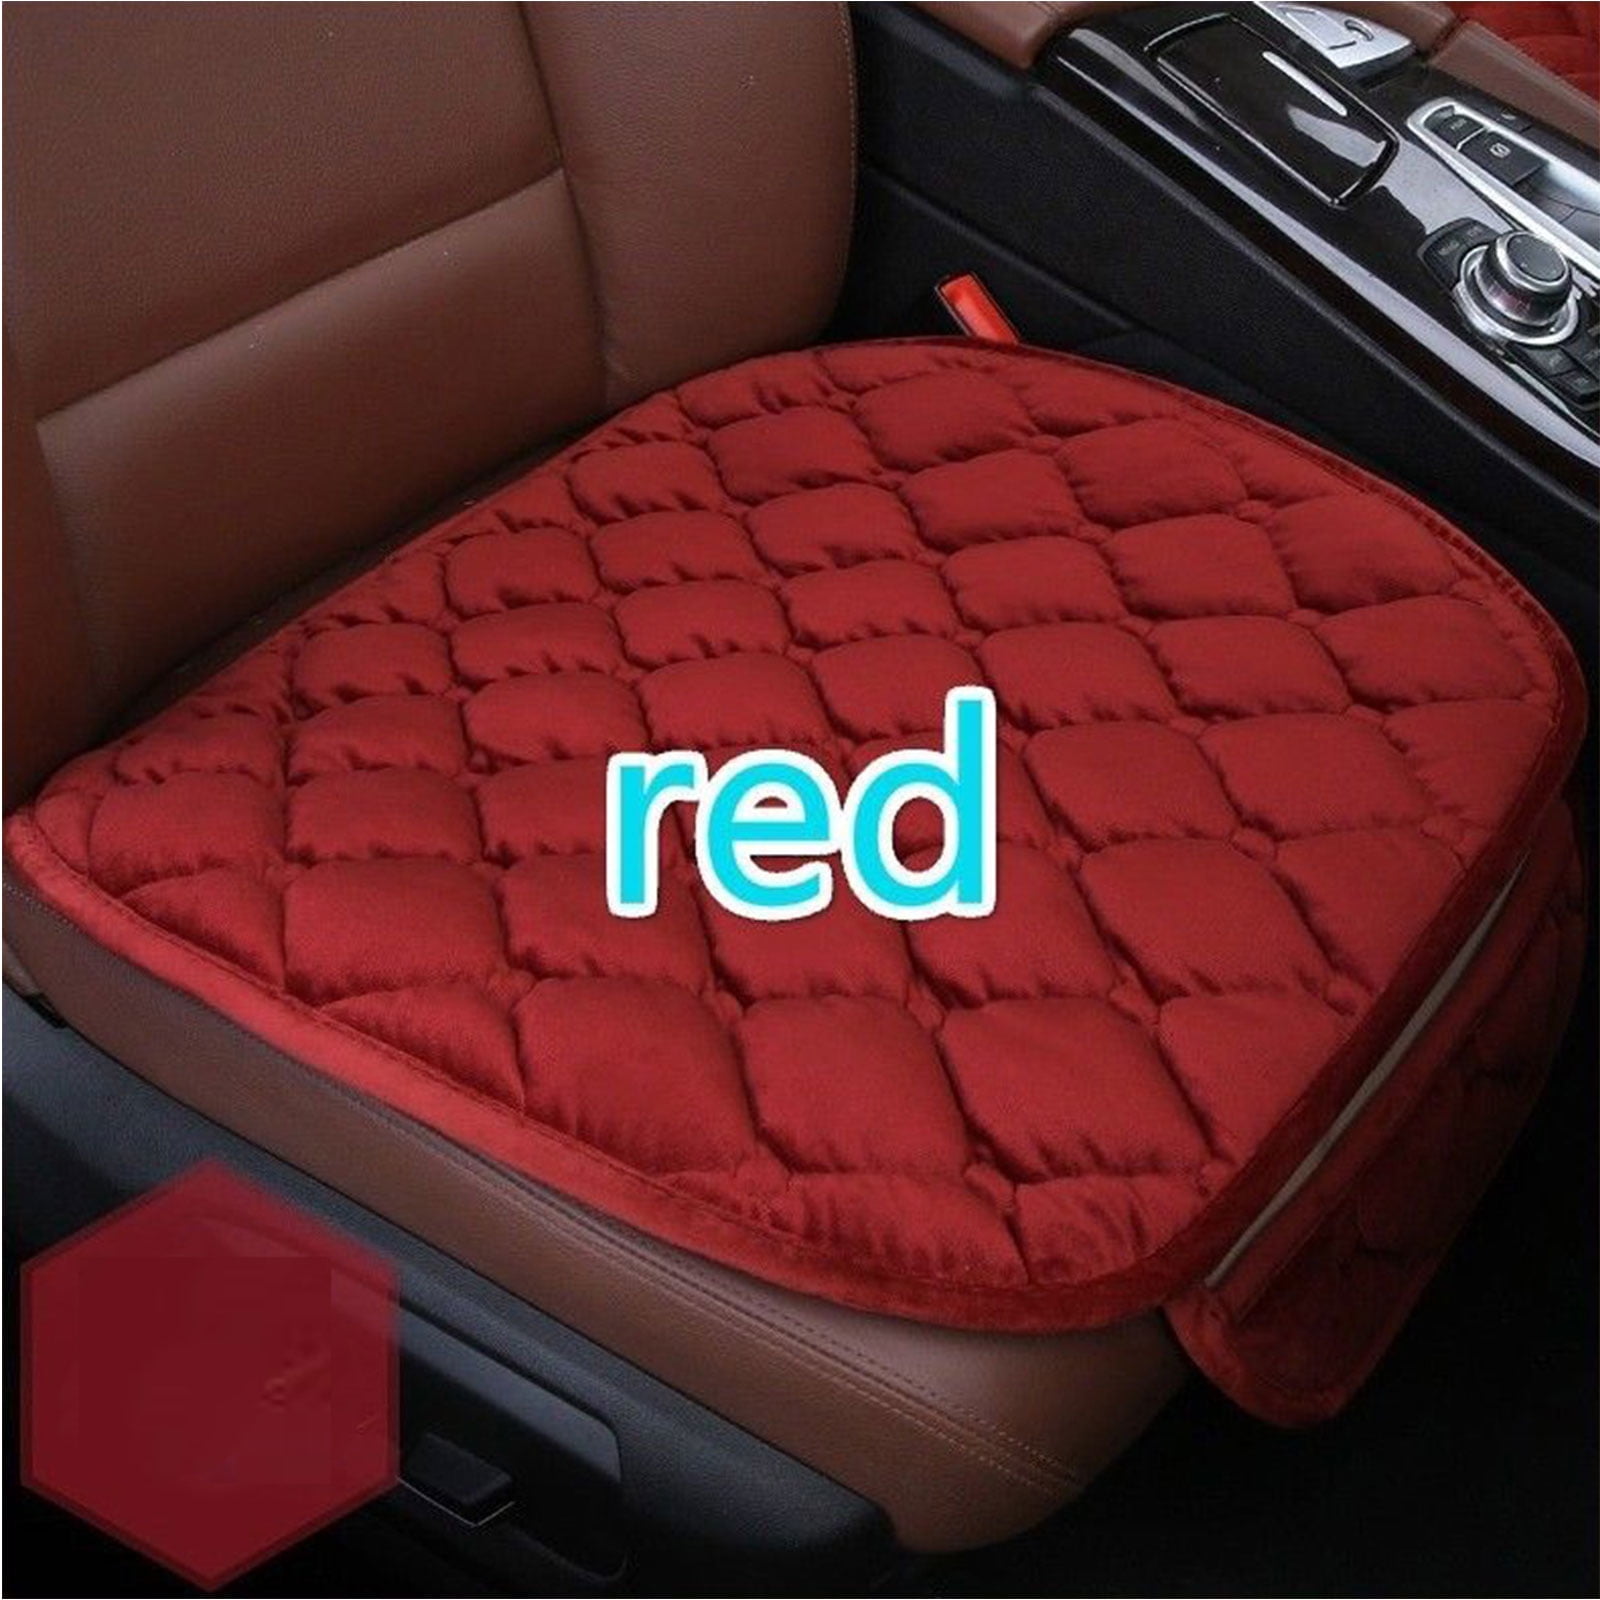 Kingleting Car Seat Cushion, Driver Seat Cushion for Height, Universal